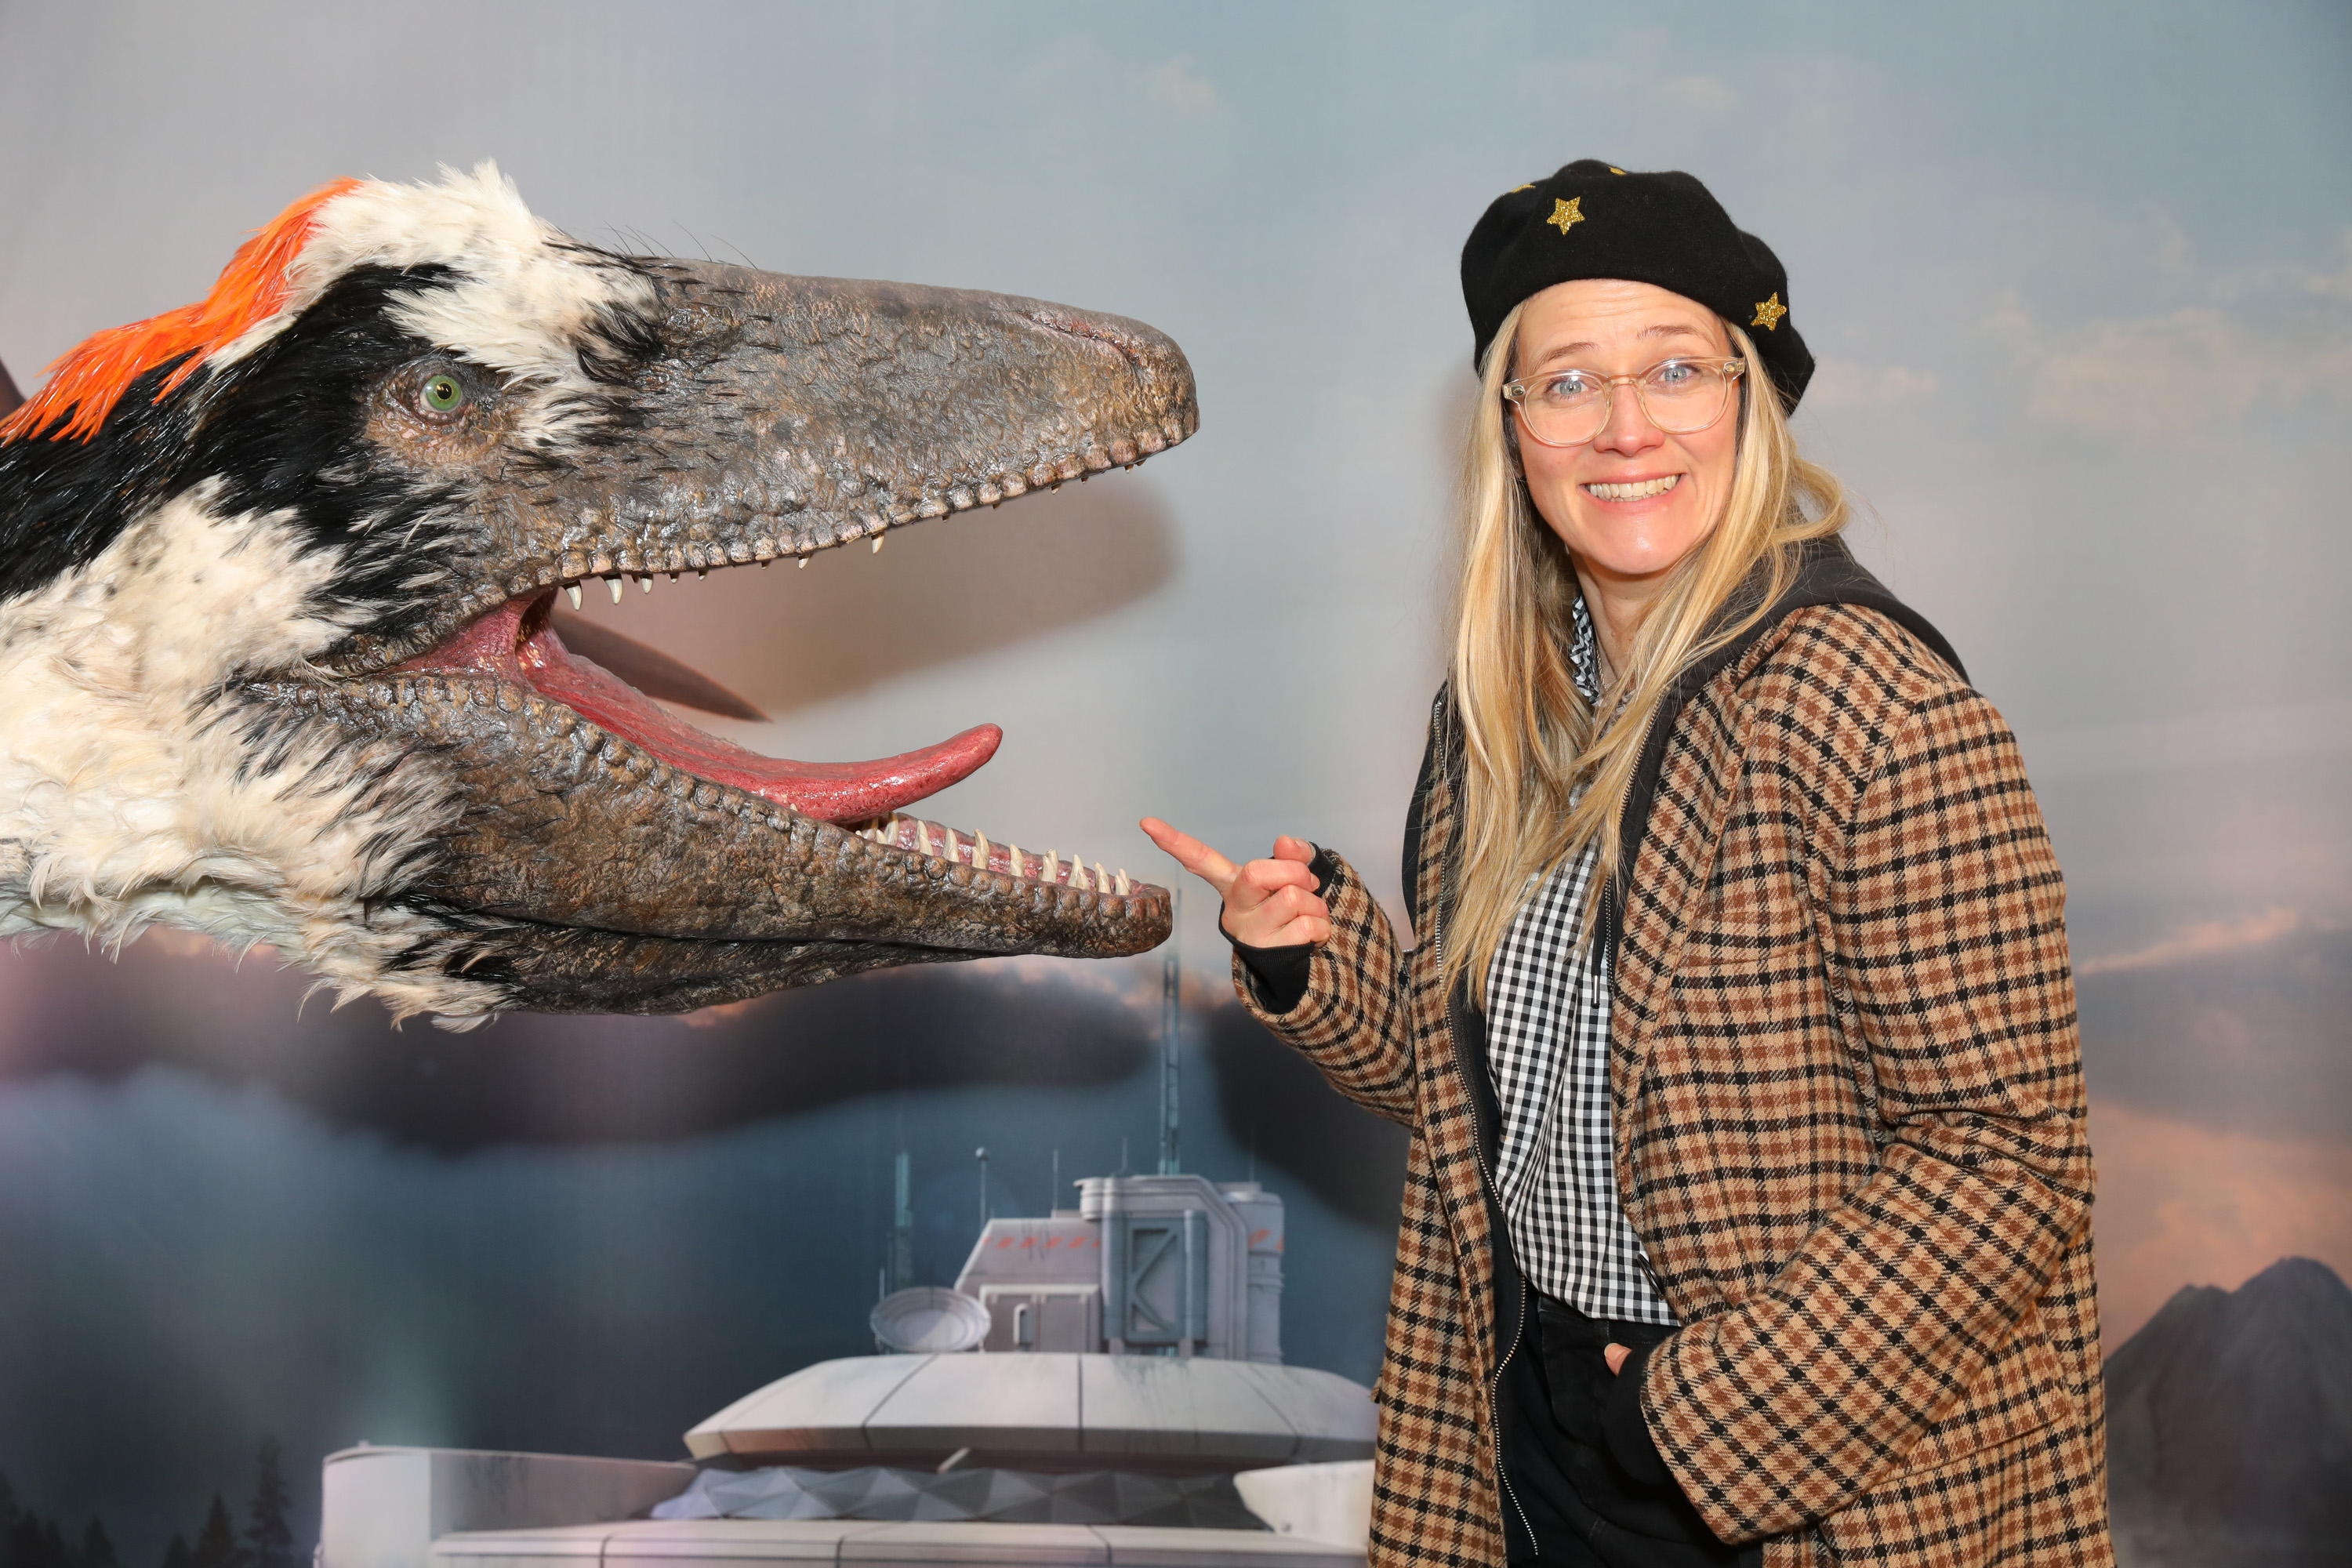 Edith Bowman at the launch of Dinosaurs in the Wild in London